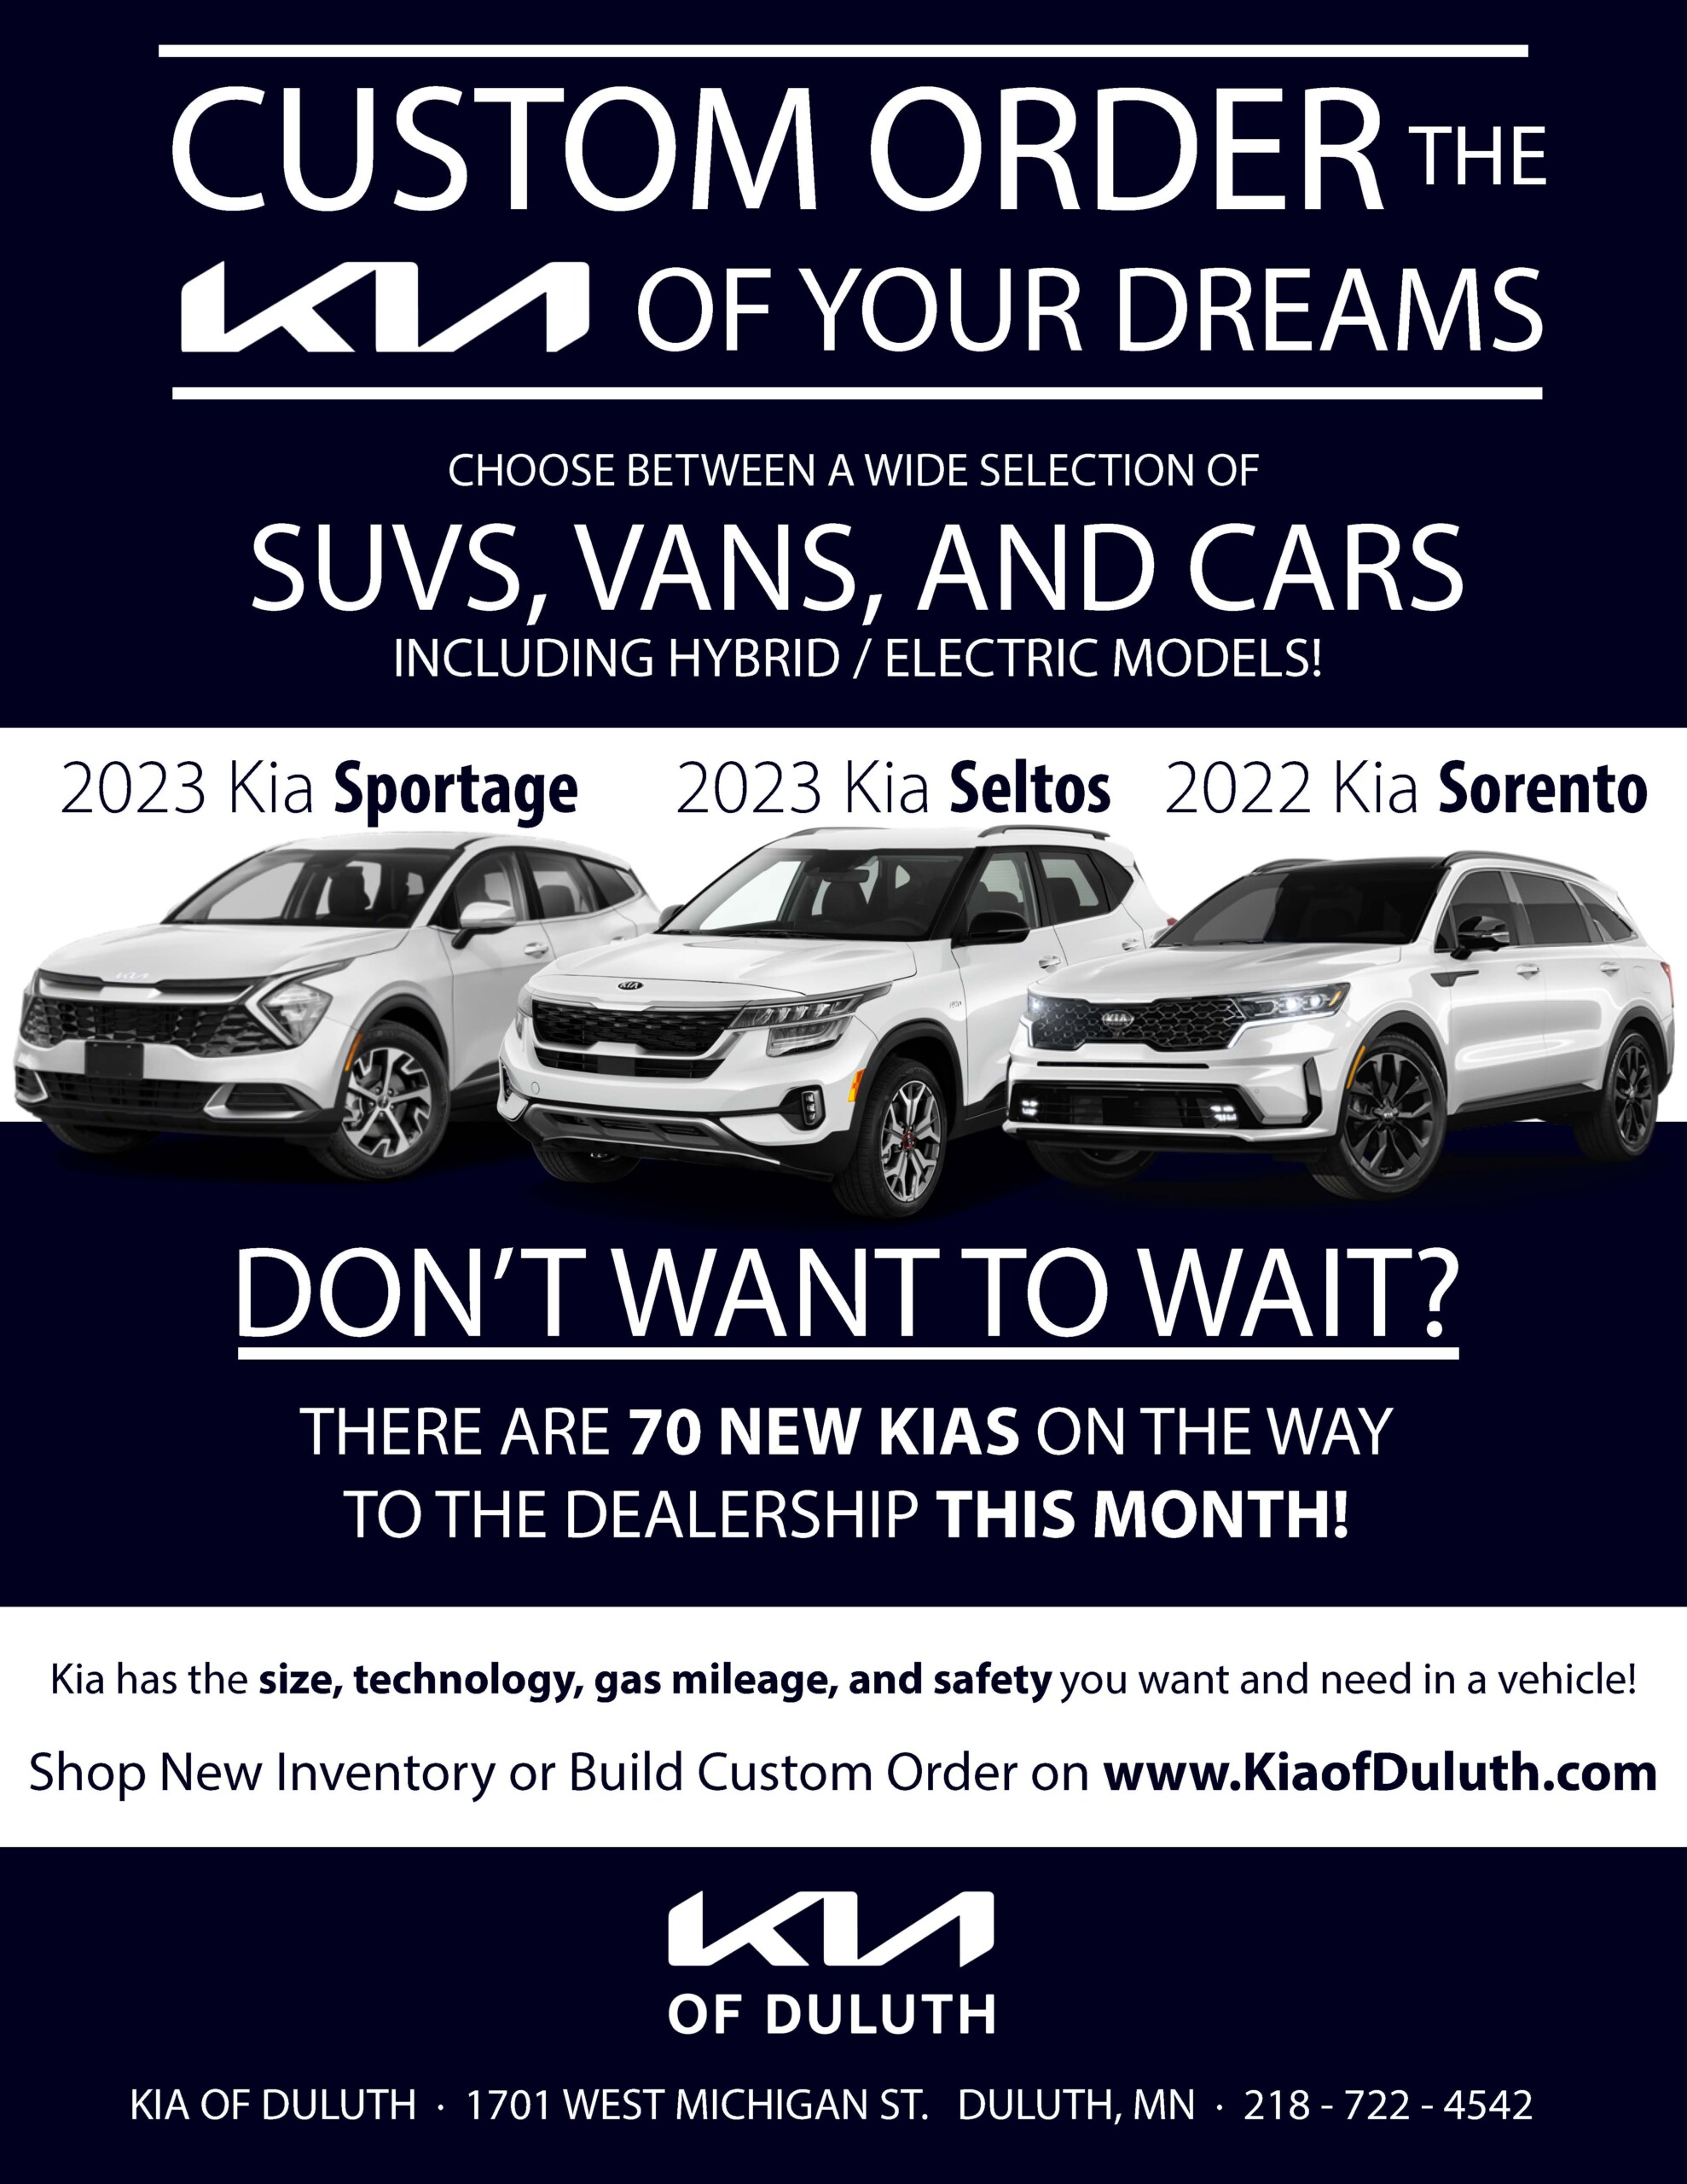 Kia of Duluth Fall Guide advertisement